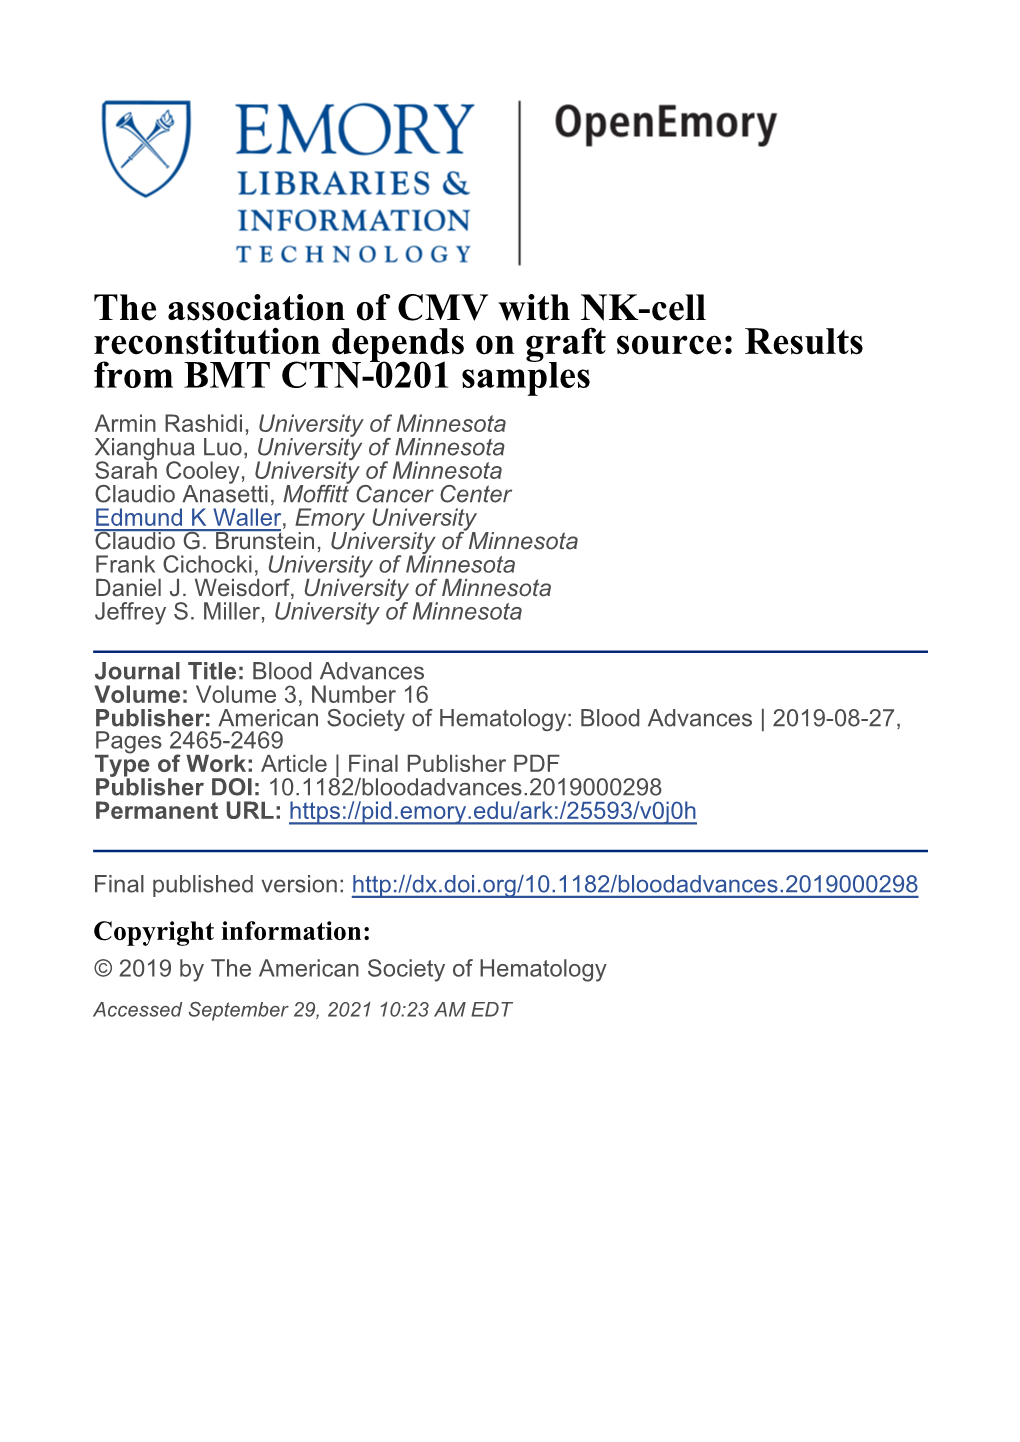 The Association of CMV with NK-Cell Reconstitution Depends on Graft